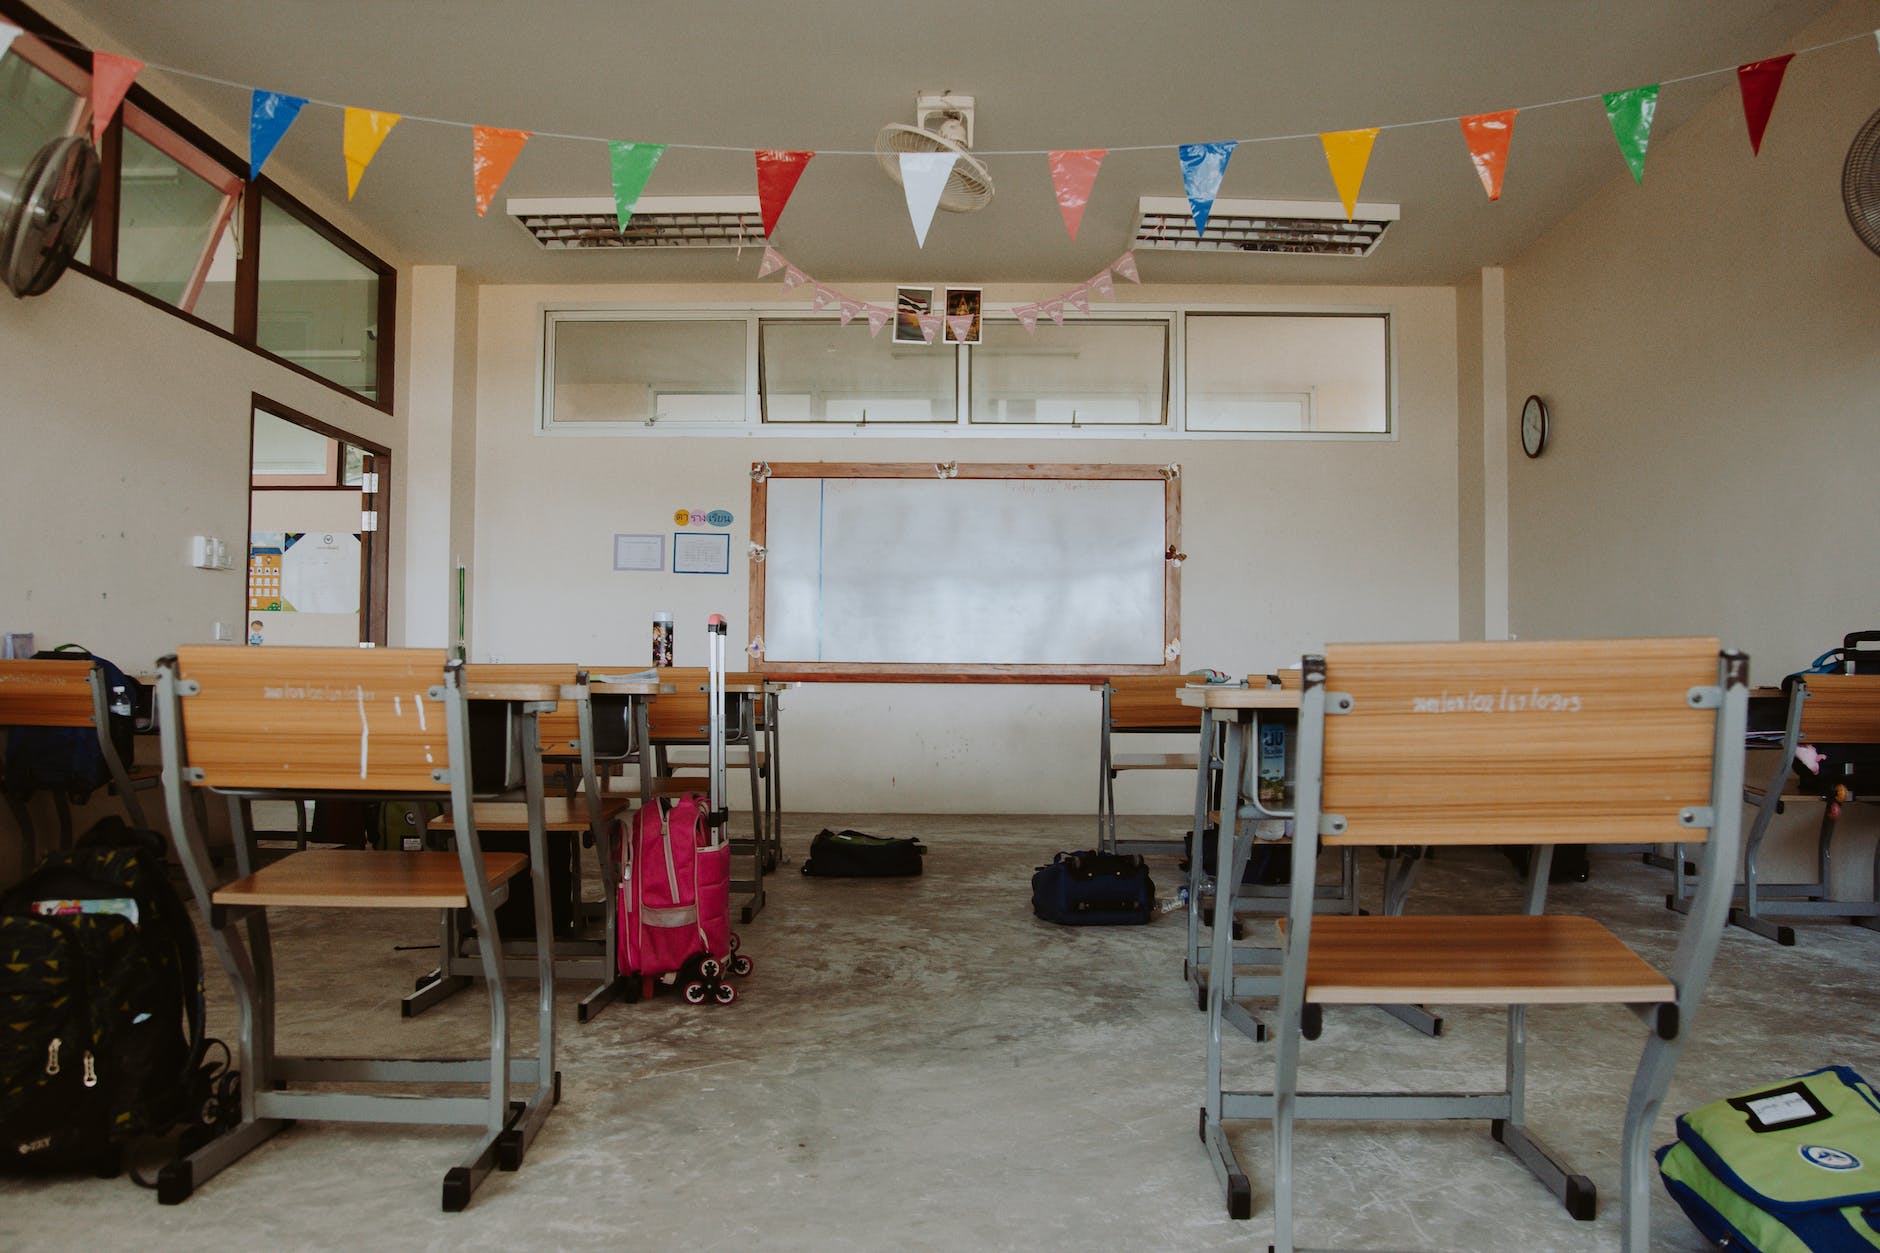 rows of chairs and desks in empty classroom